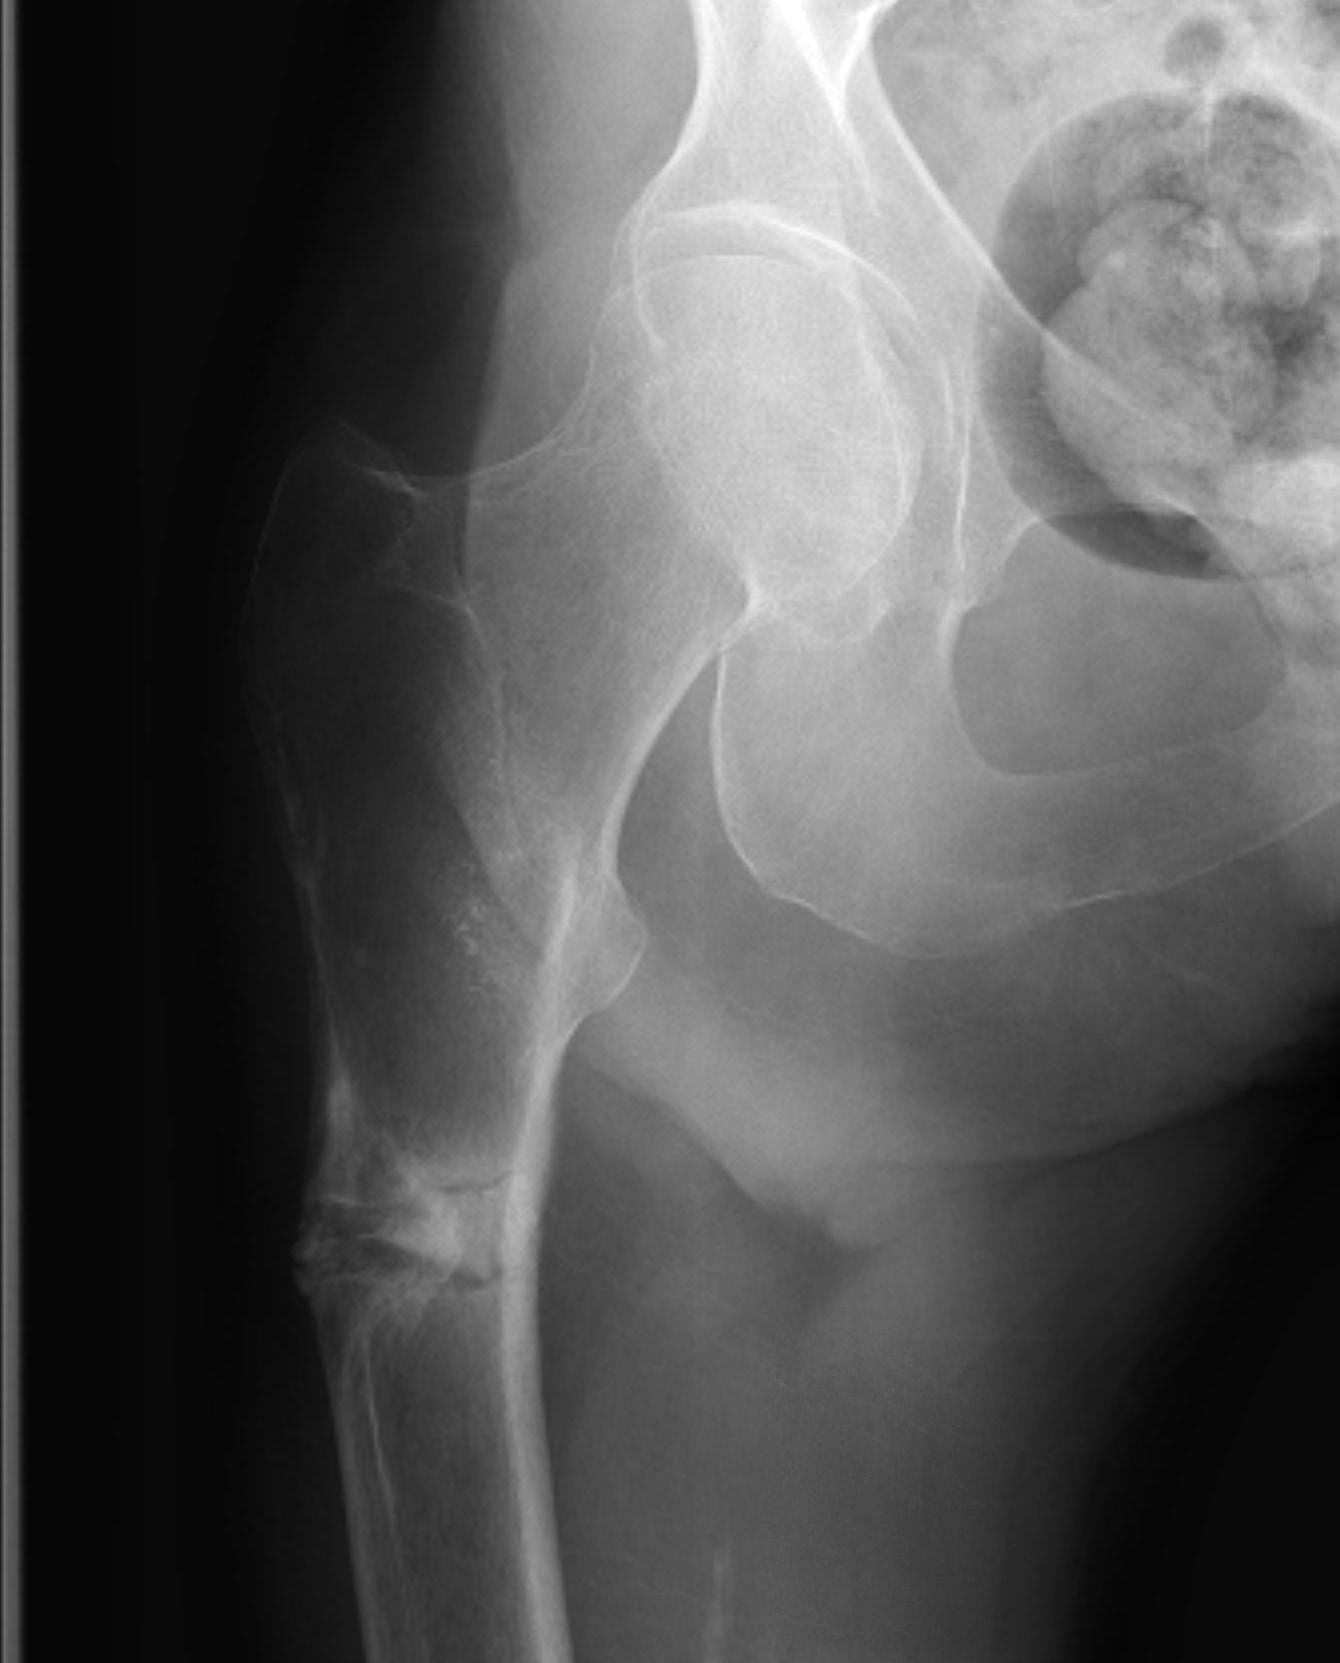 Femoral stress fracture